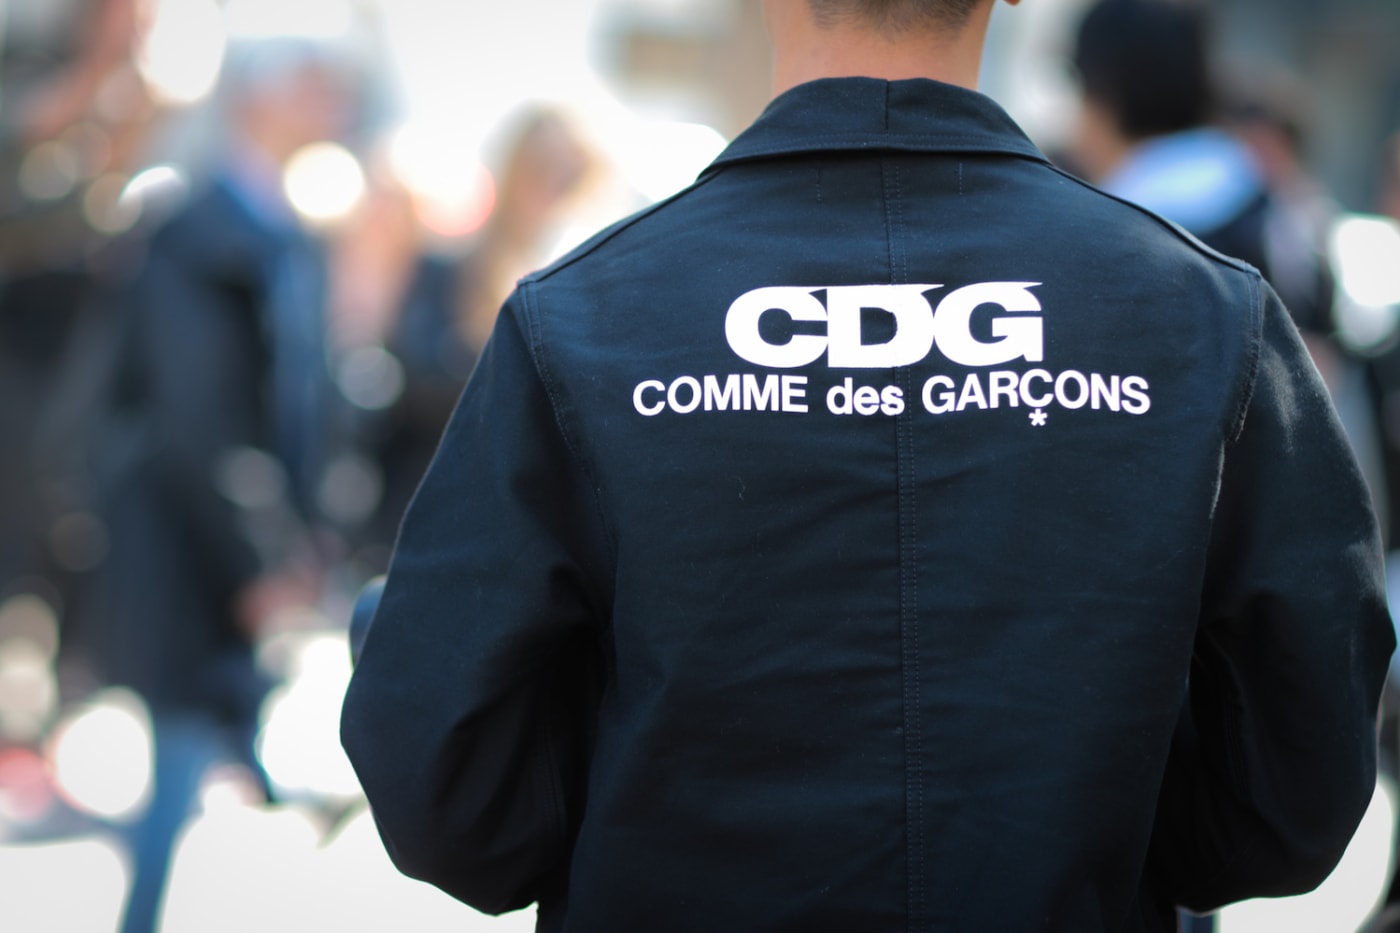 How to Pronounce Brand and Designer Names Complex CDG